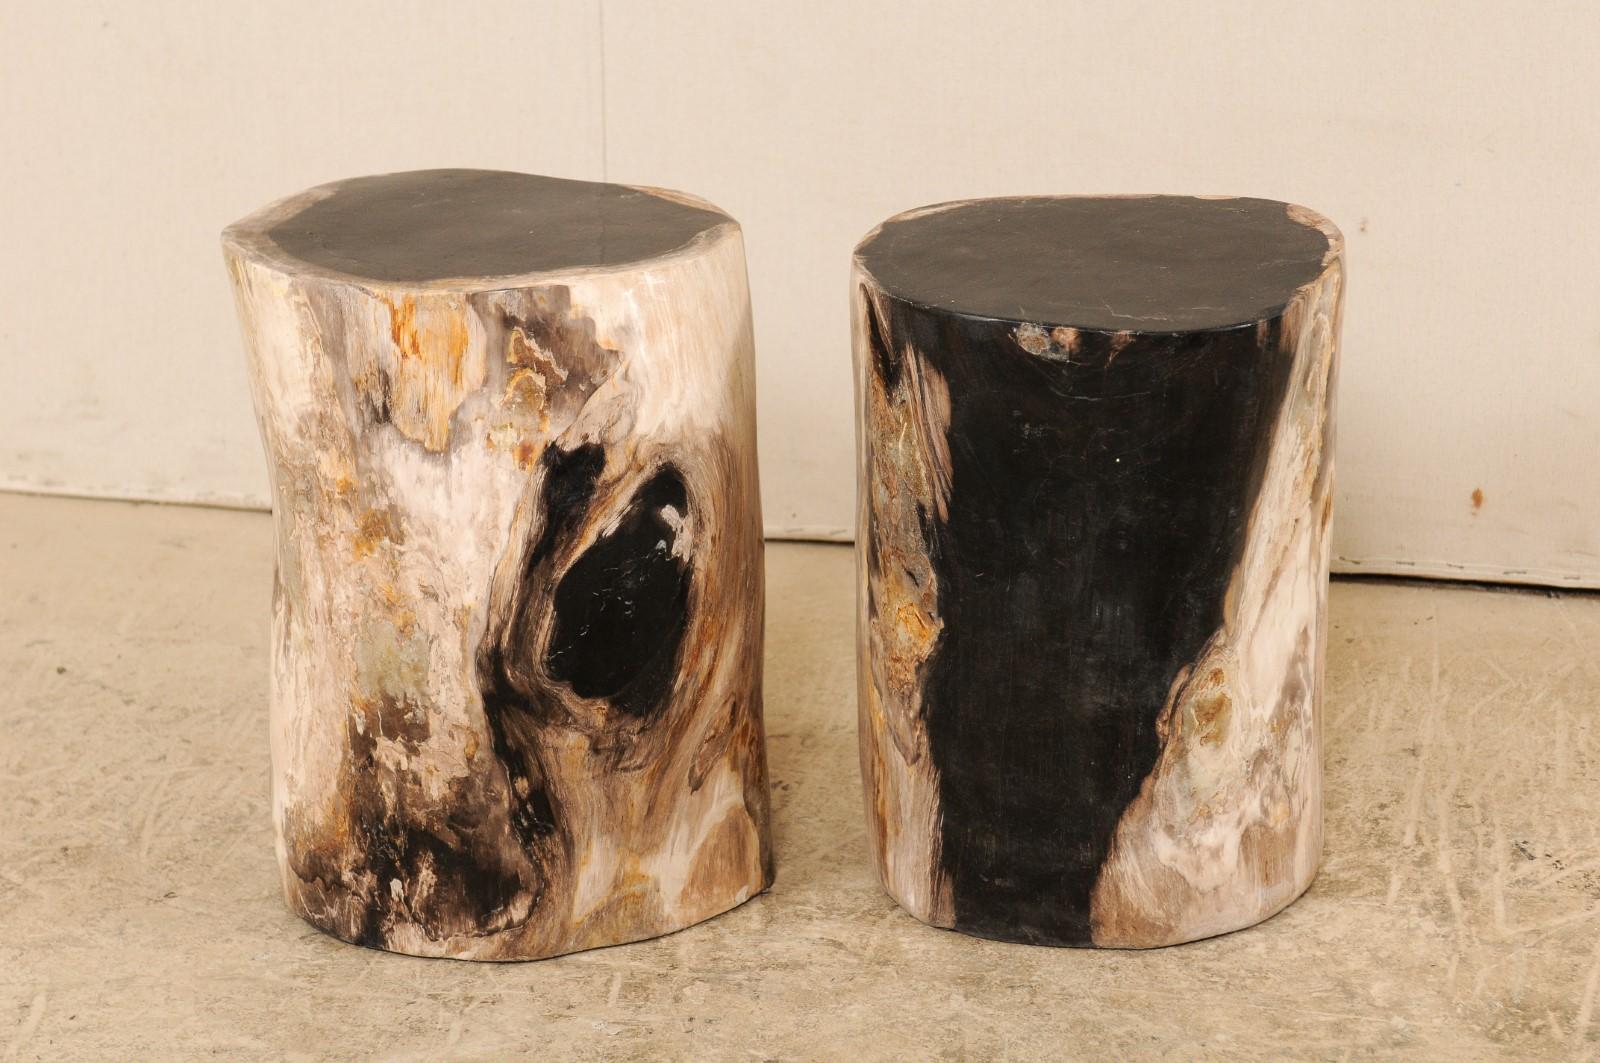 Carved Pair of Polished Petrified Wood Side Tables or Stools in Cream and Black